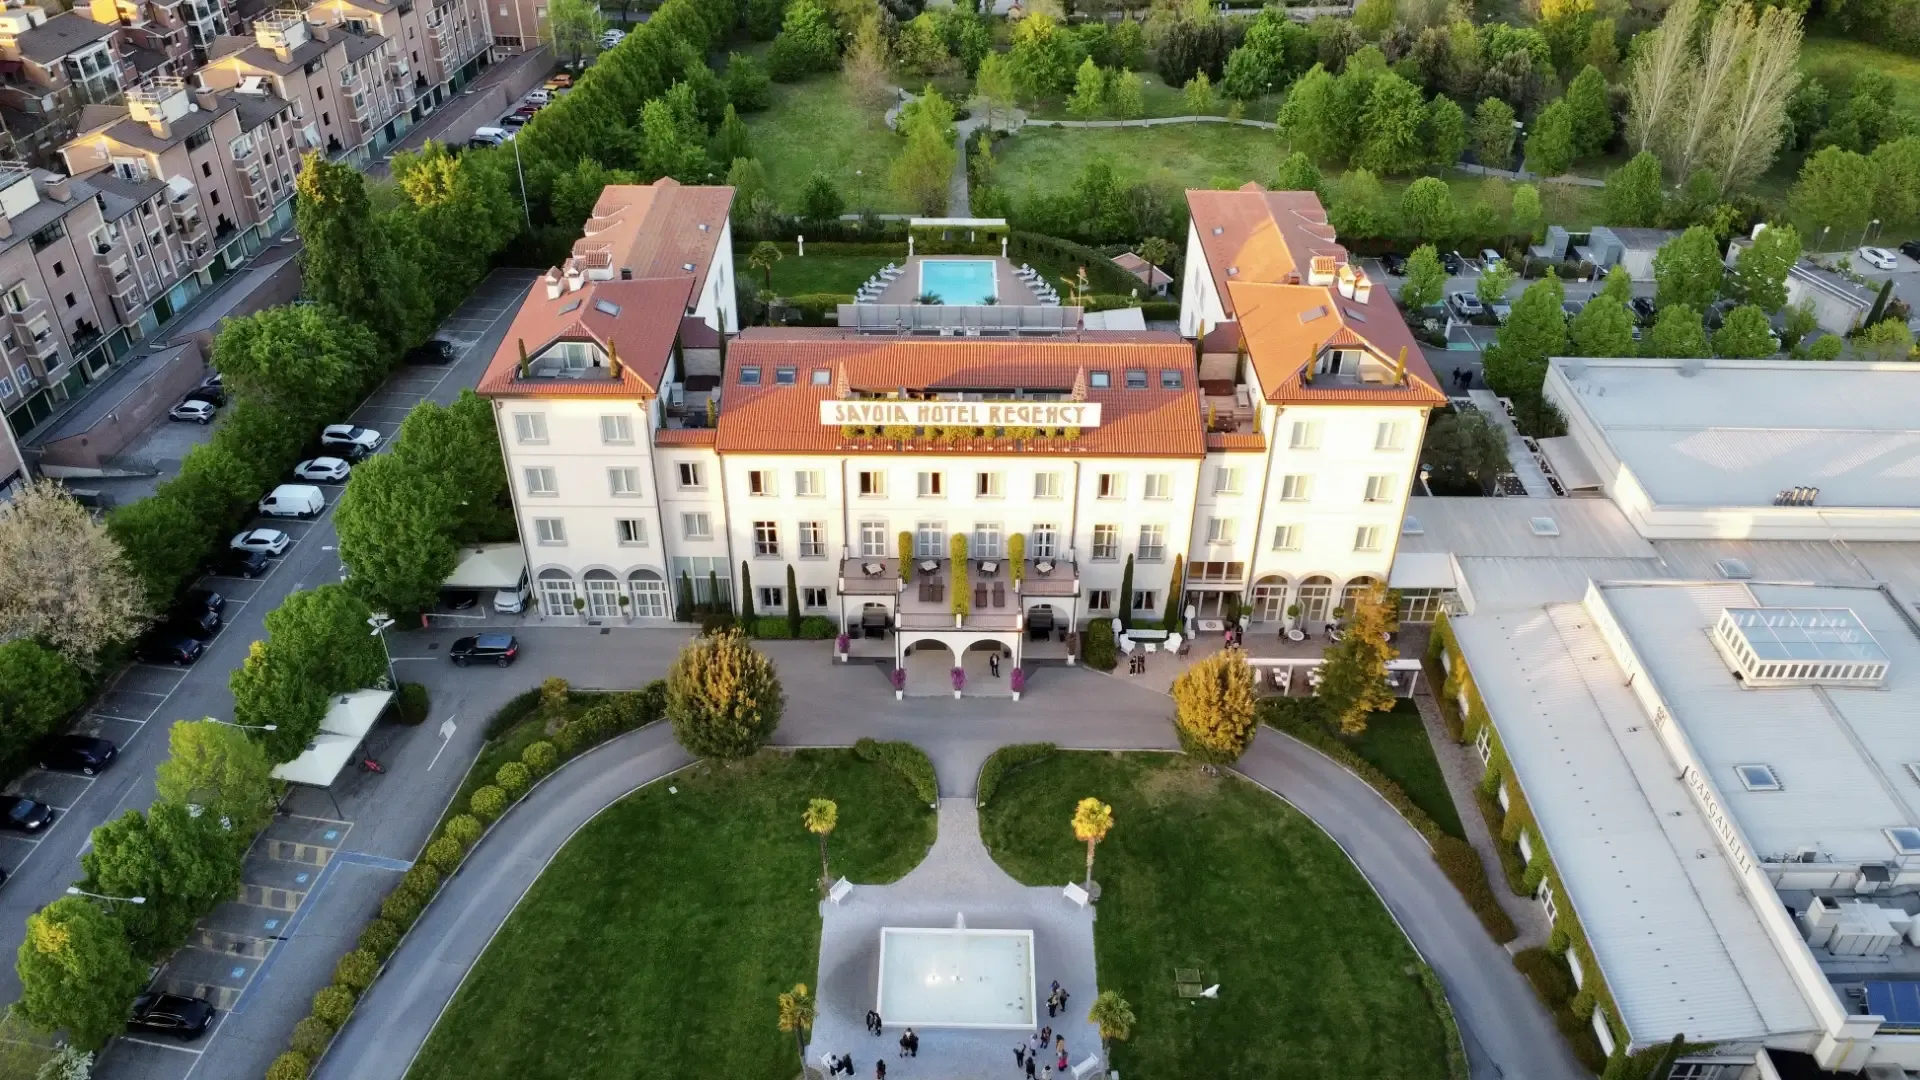 Aerial view of Savoia Hotel Regency with gardens and pool.